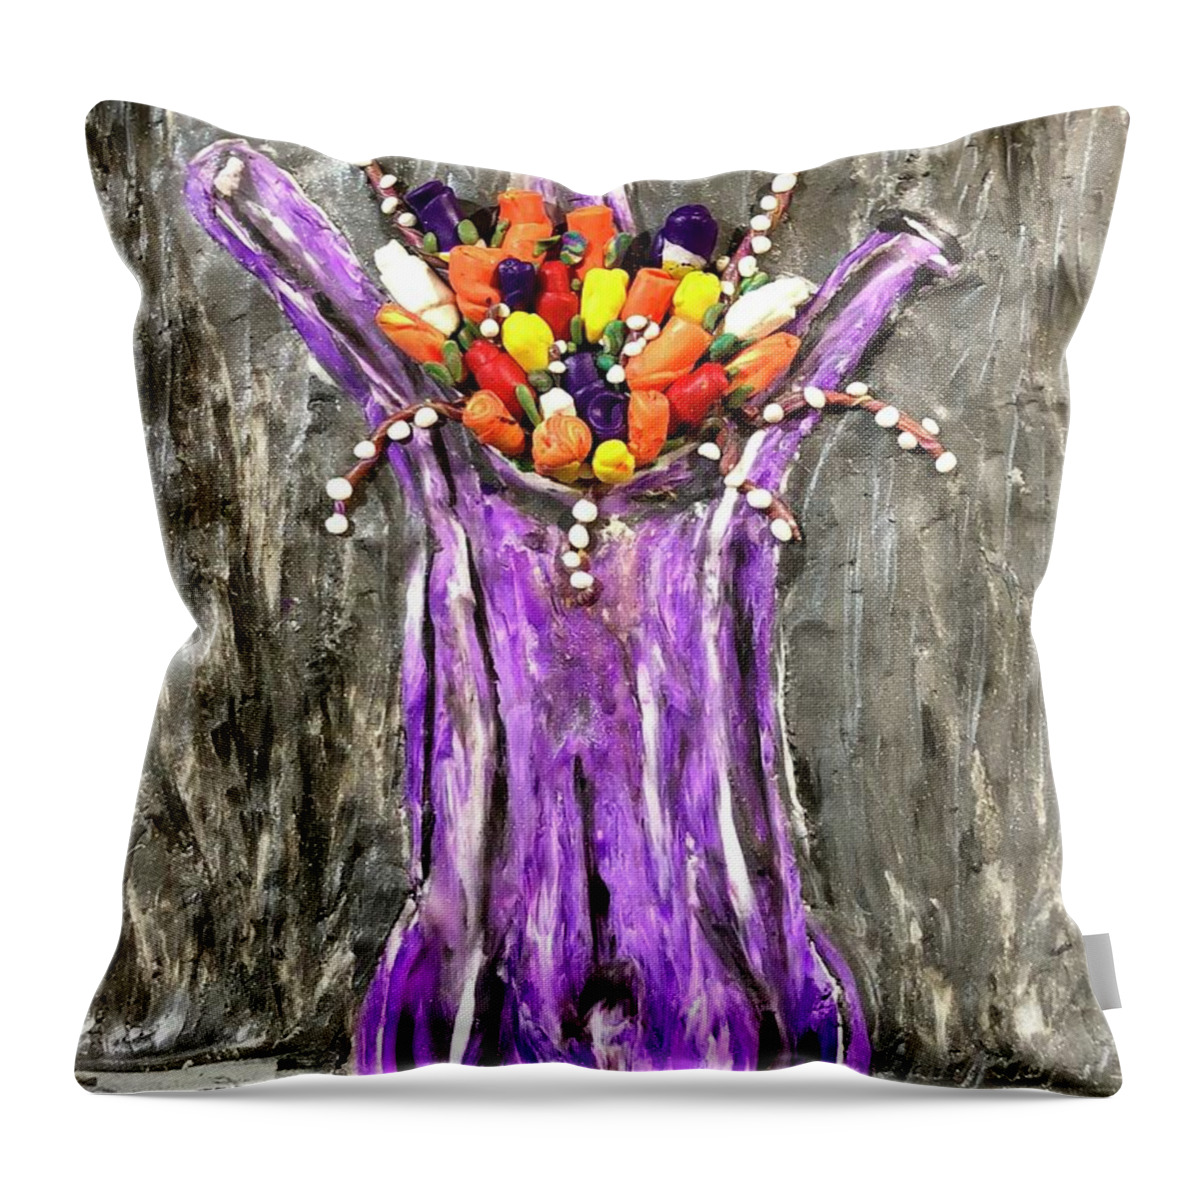  Throw Pillow featuring the mixed media The Purple Vase by Deborah Stanley